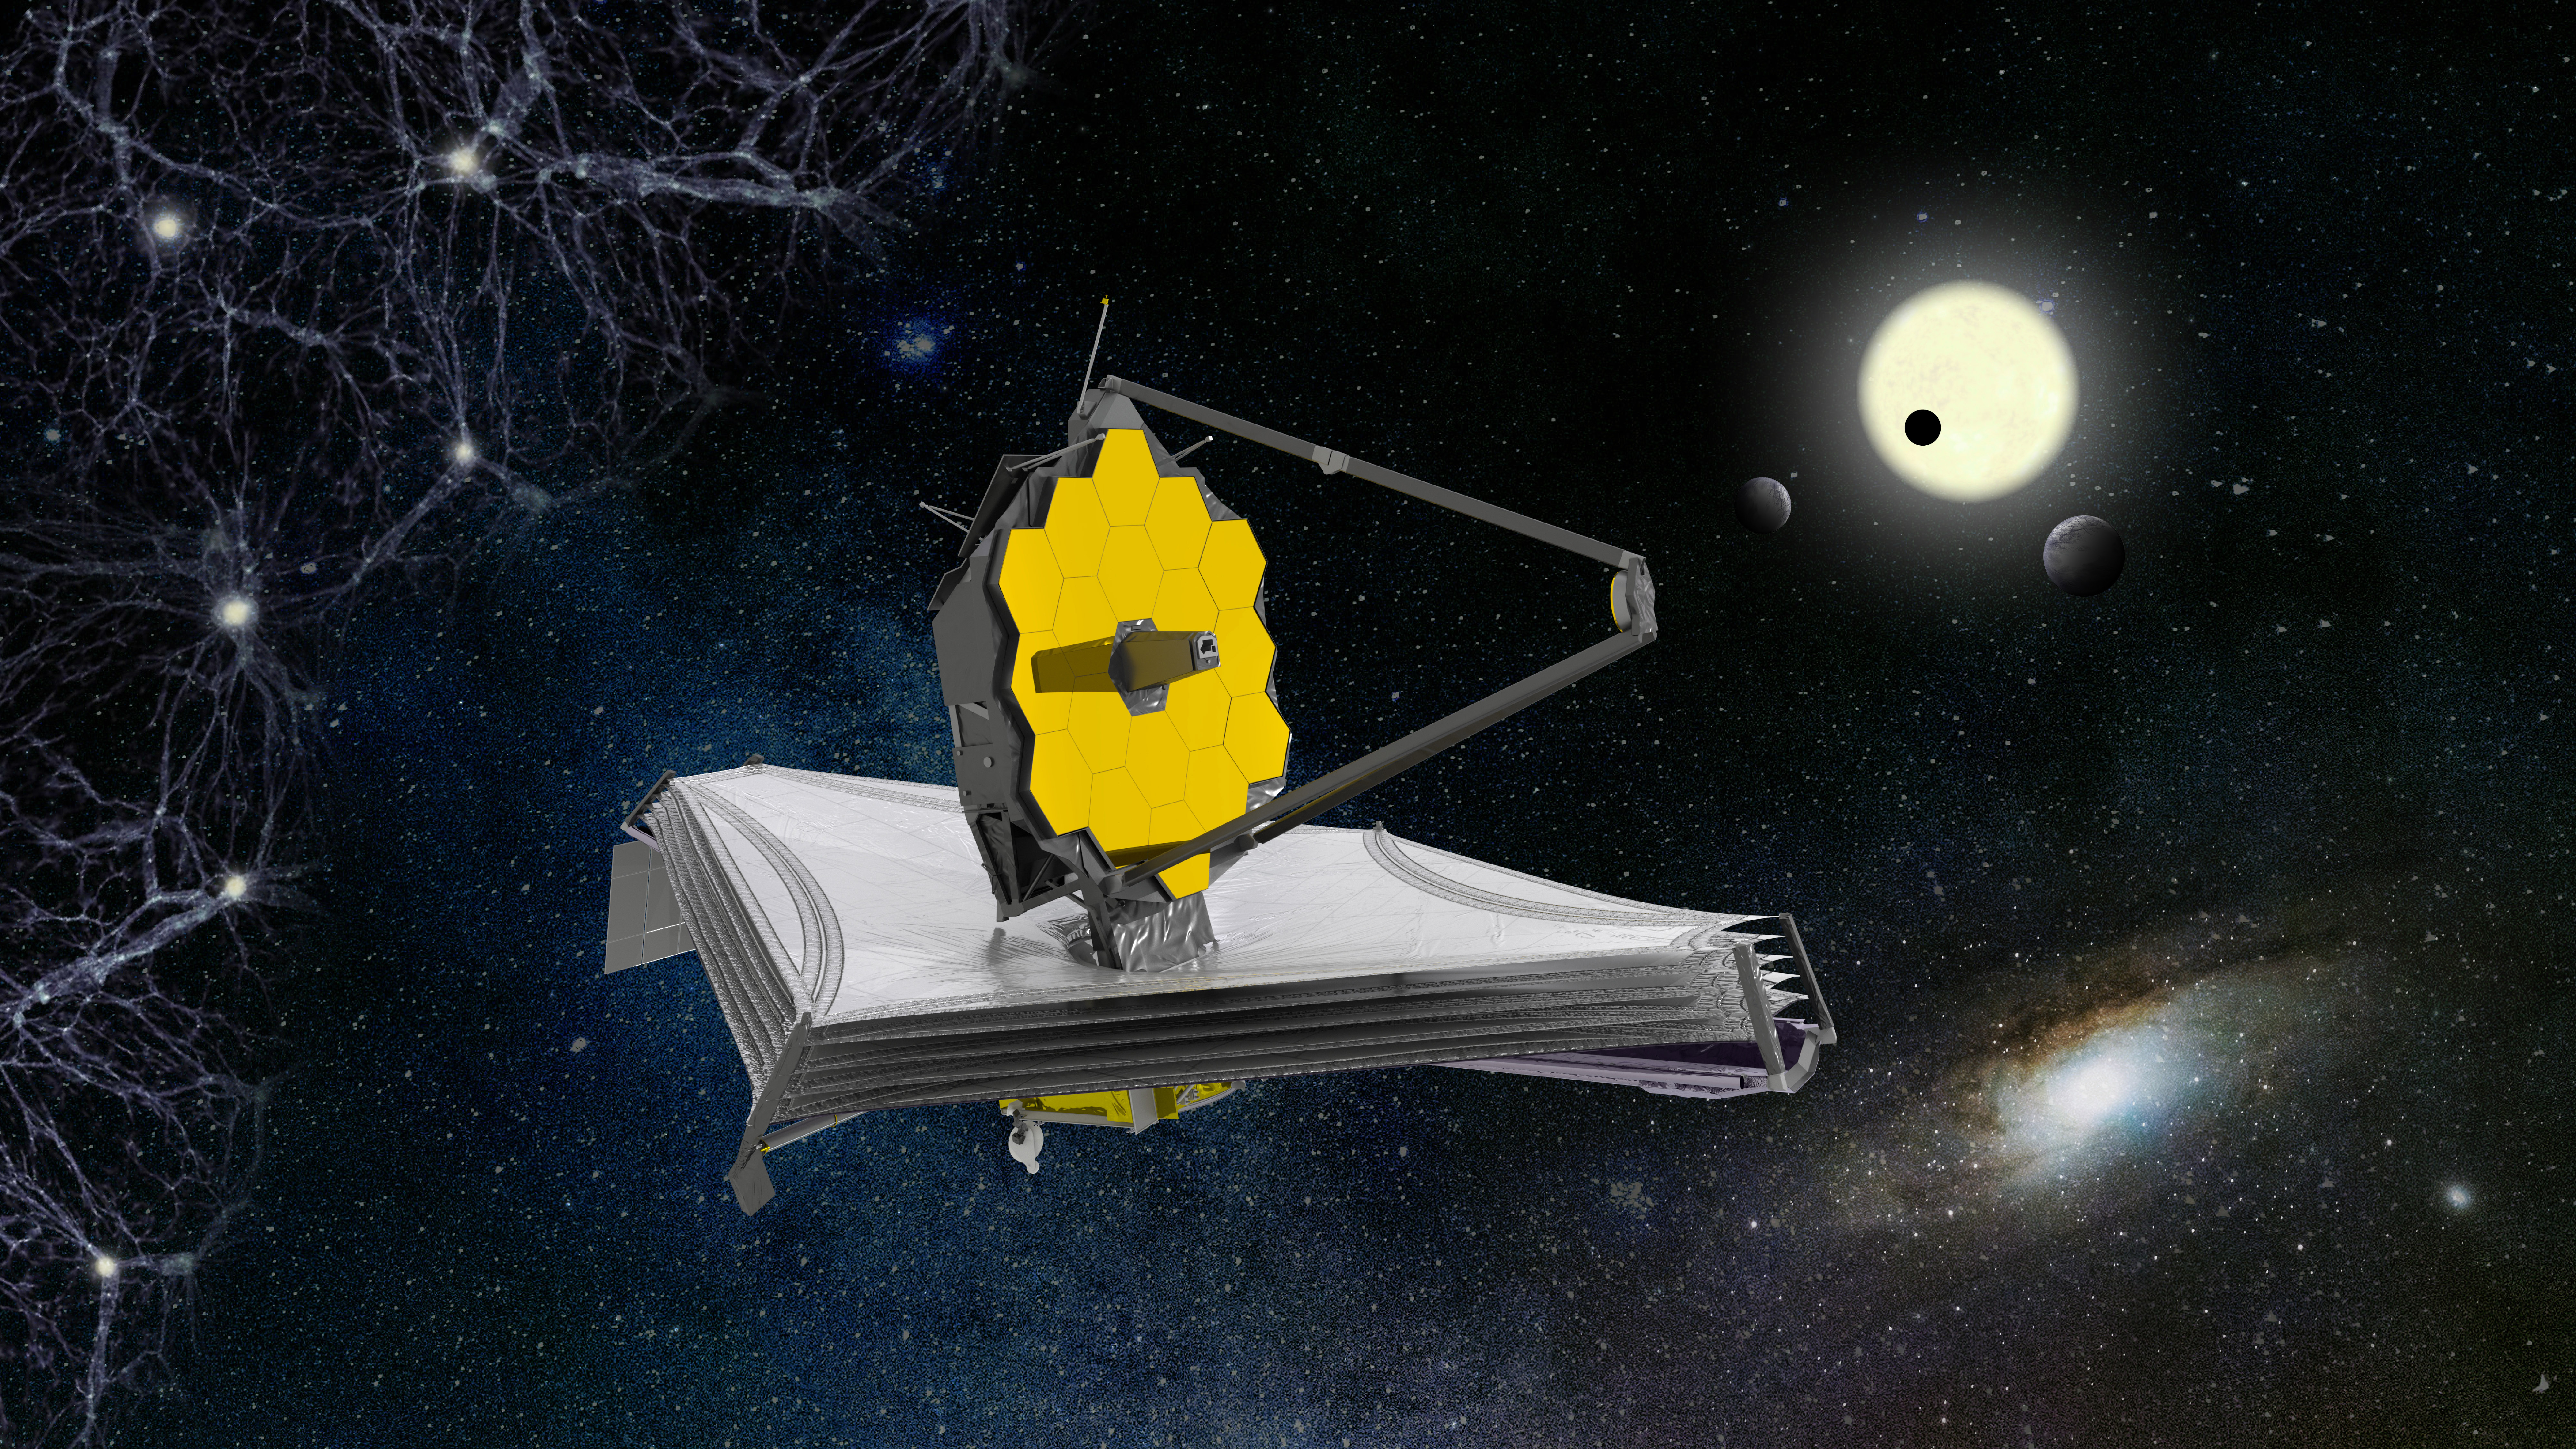 The James Webb Space Telescope can detect the first stars and galaxies to appear in the universe after the Big Bang.